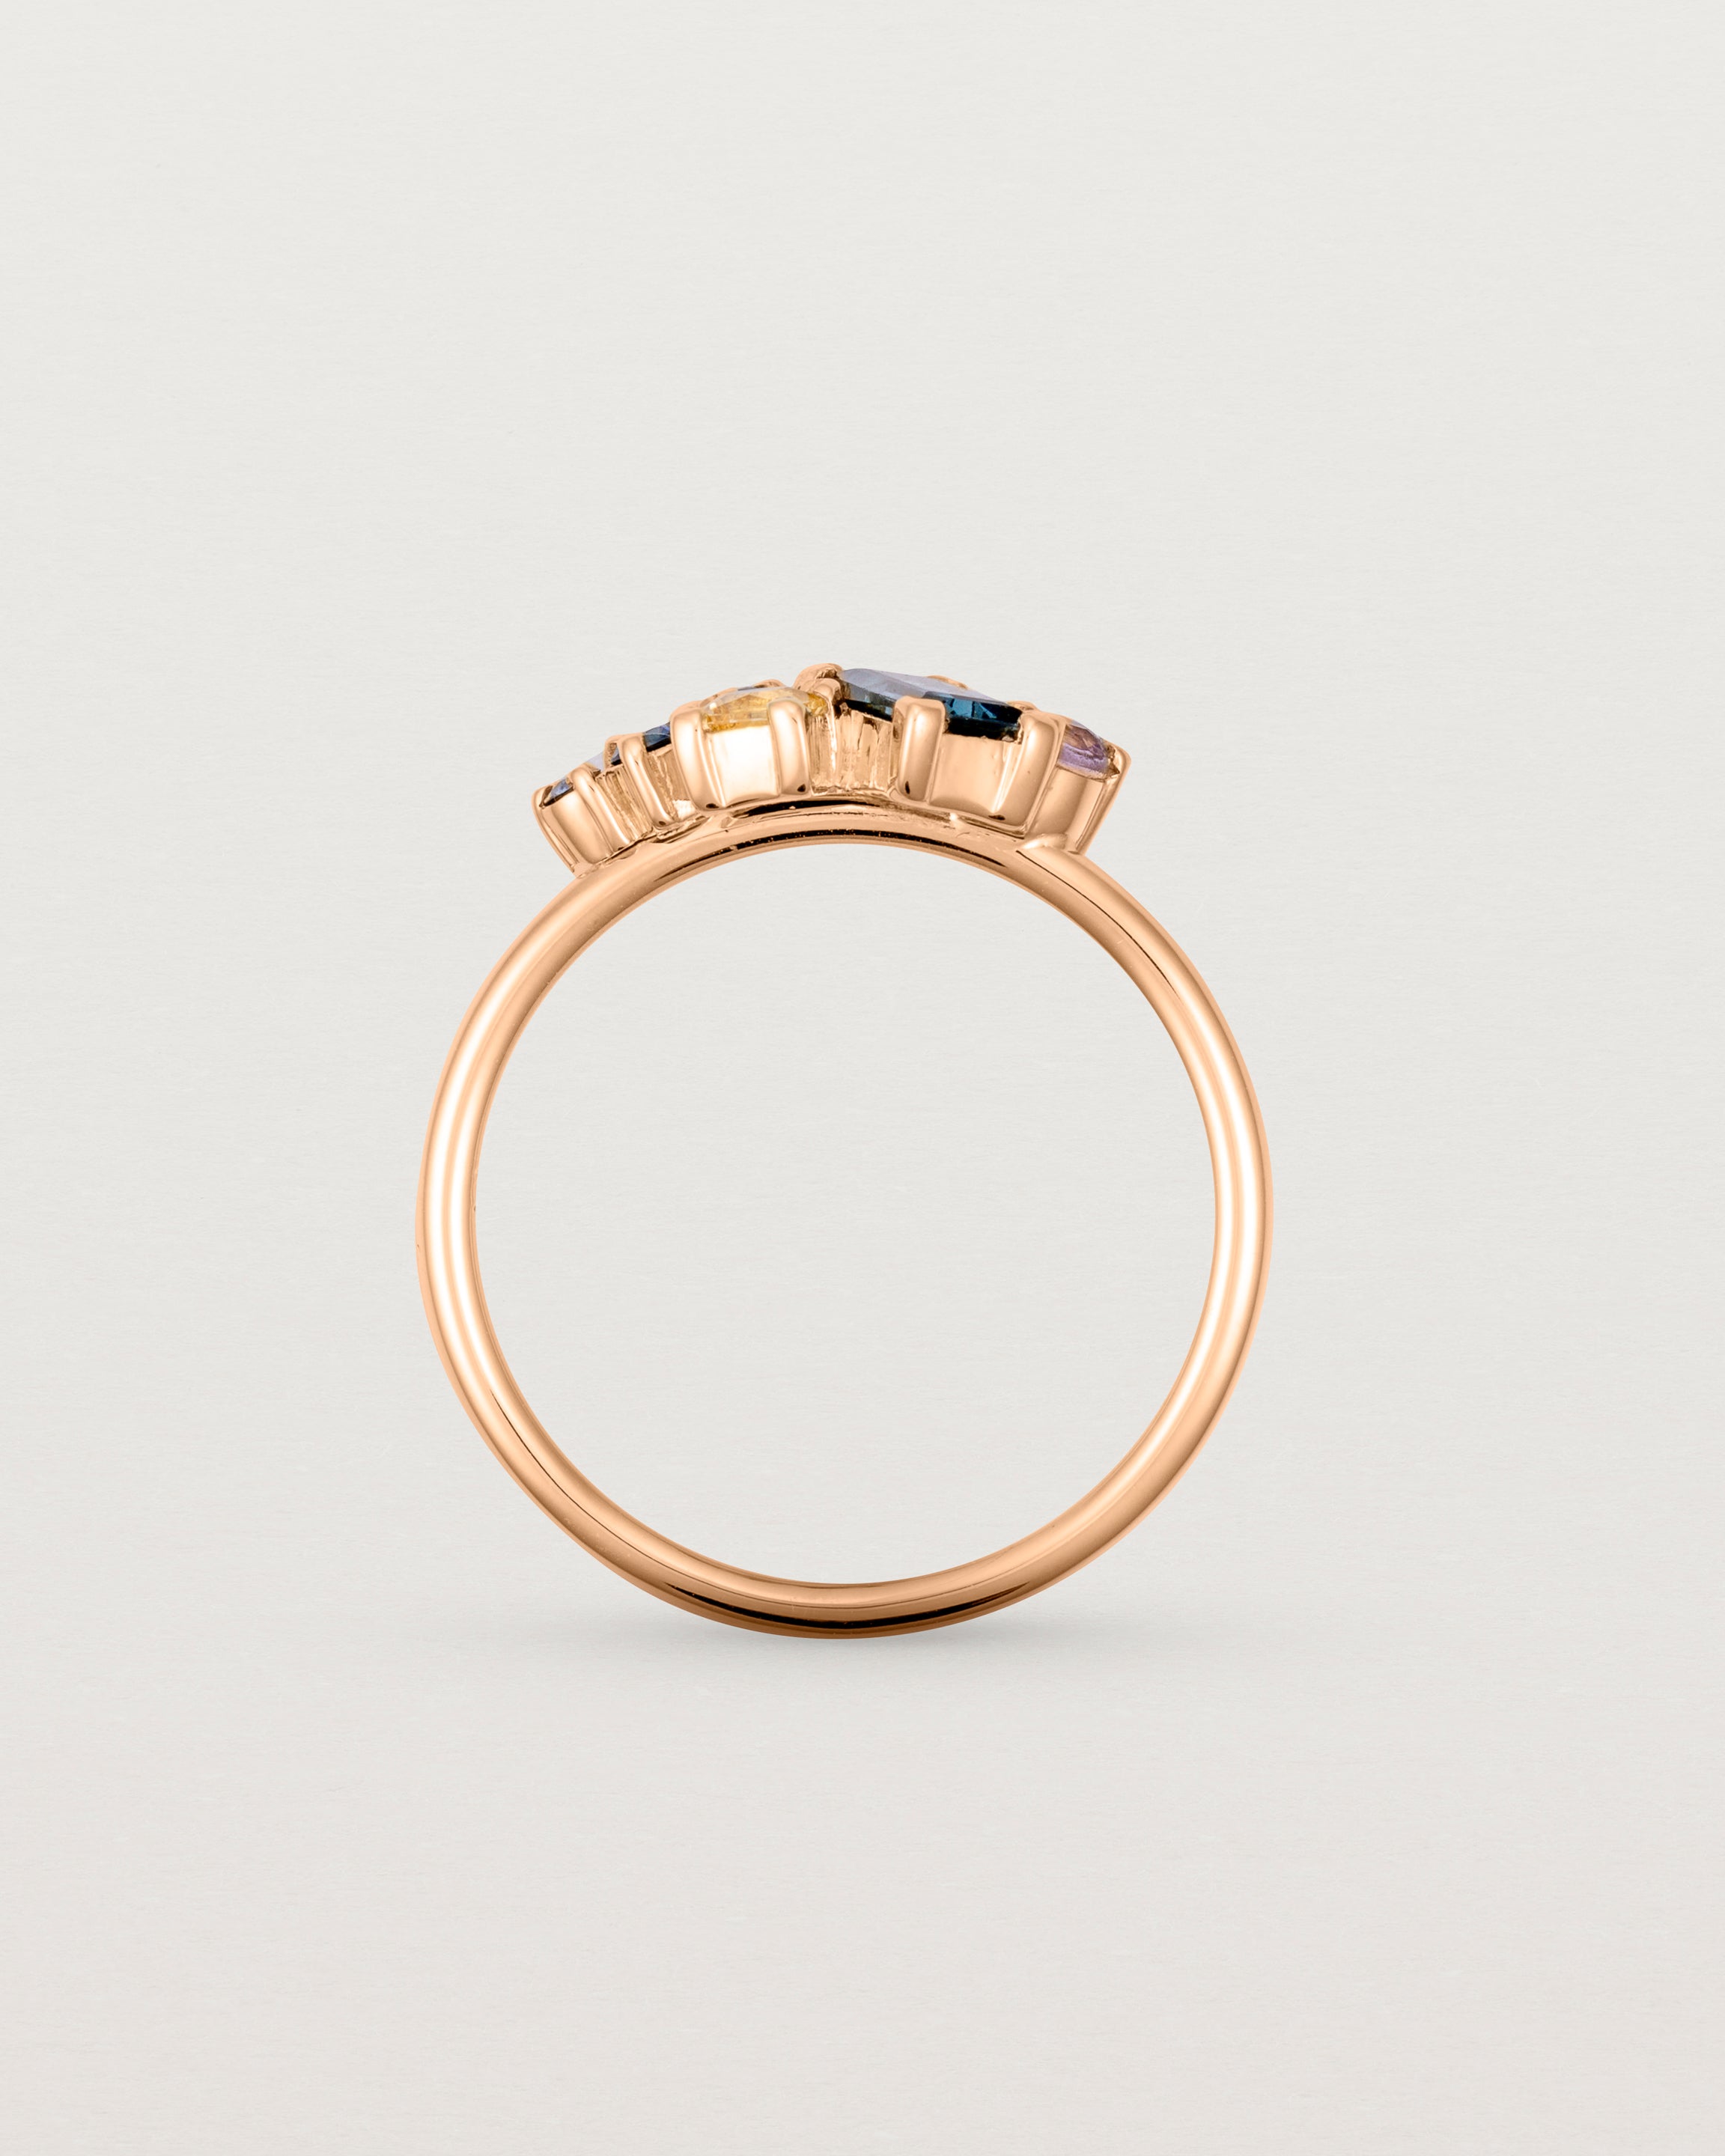 Standing view of the Mei Cluster Ring | Coloured Stones in Rose Gold.